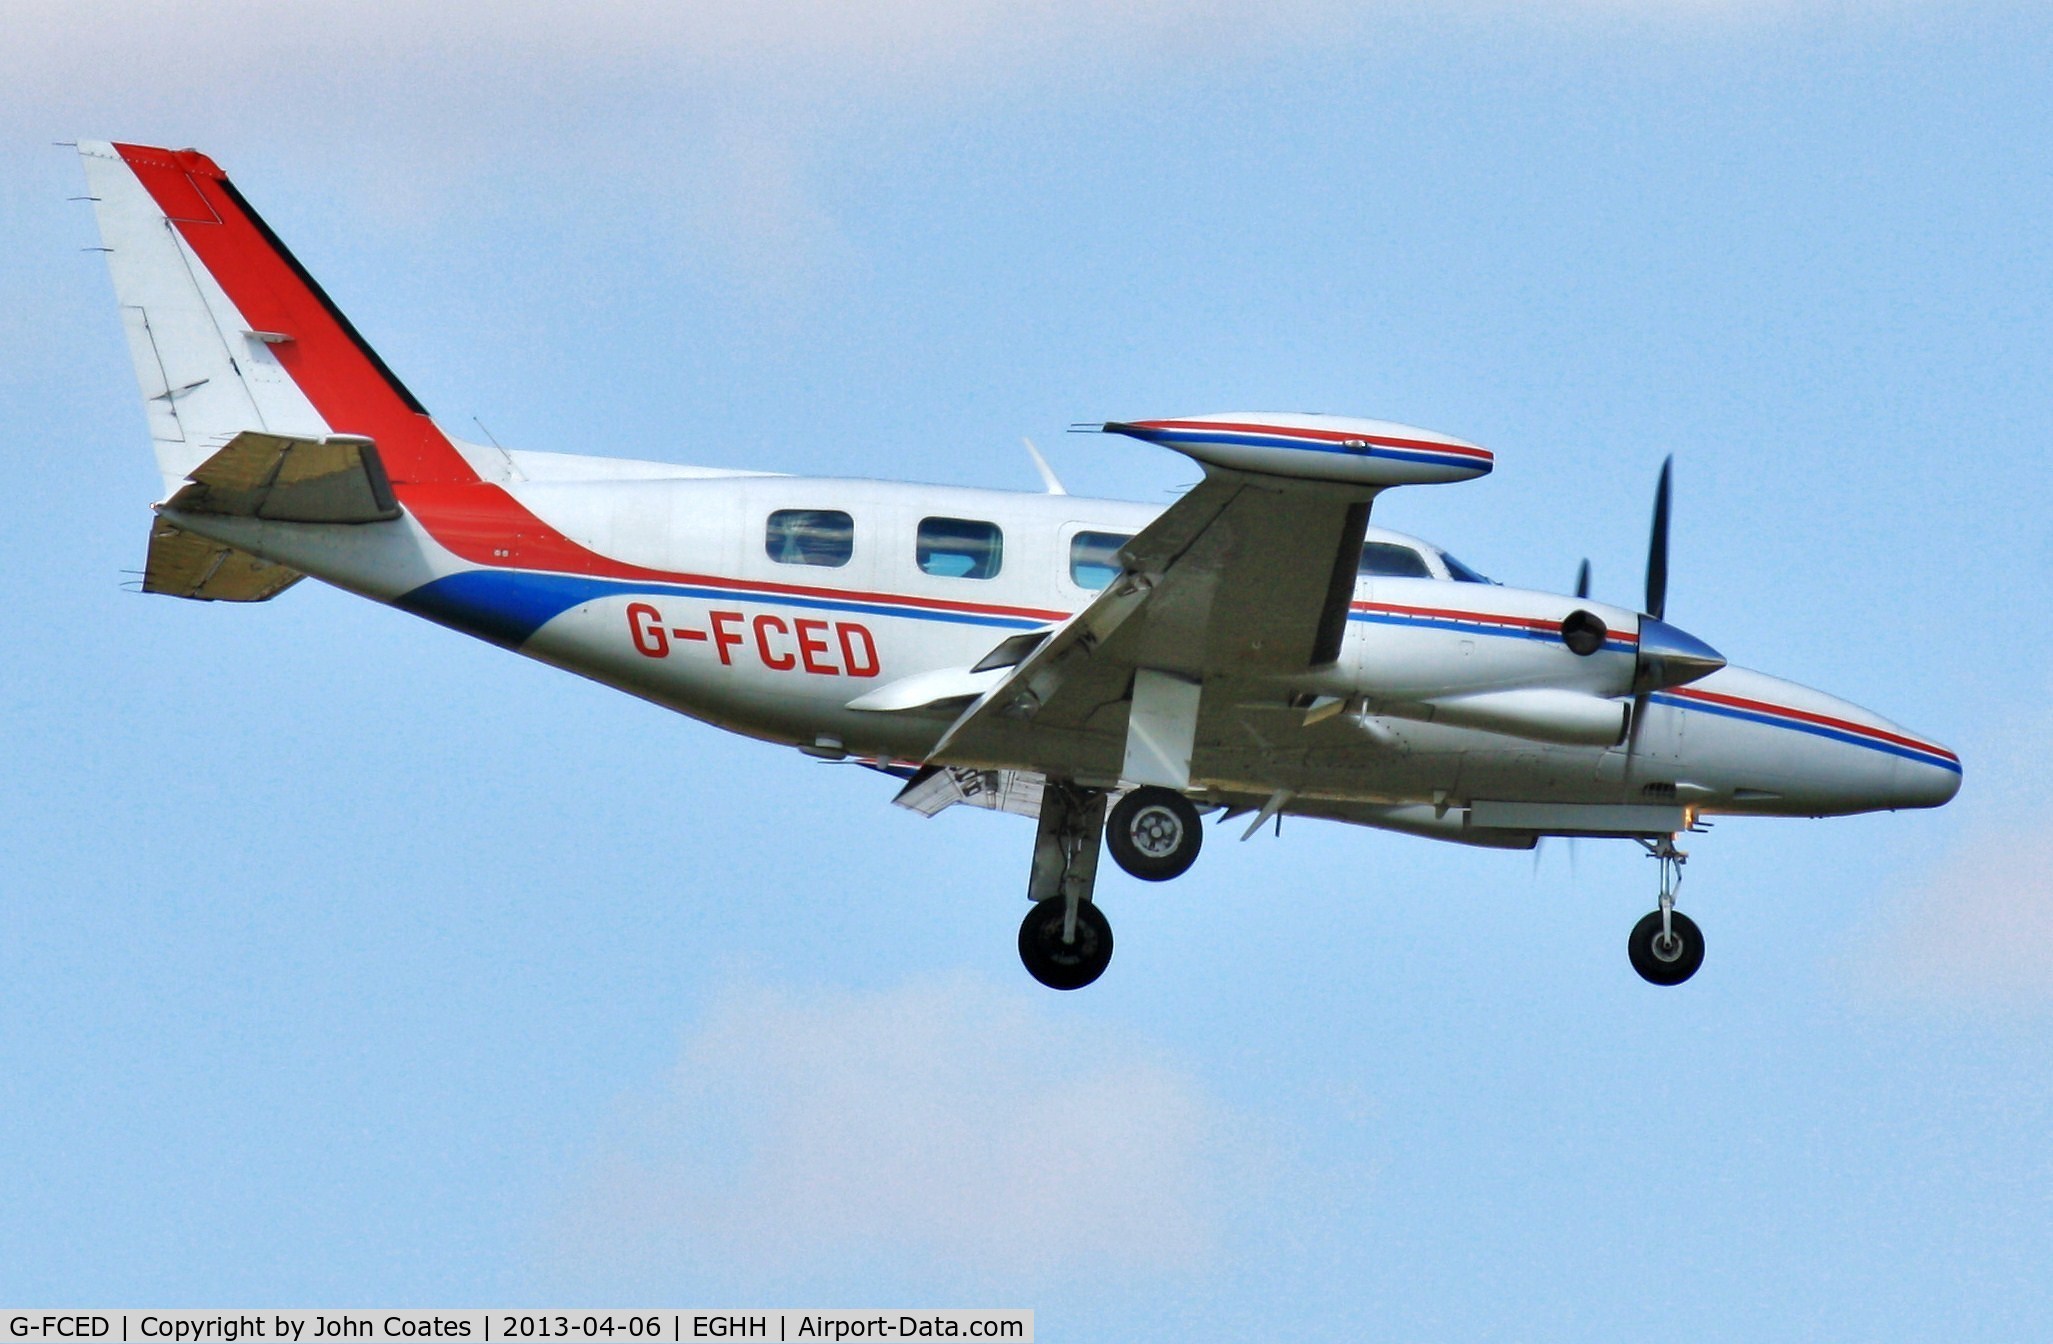 G-FCED, 1981 Piper PA-31T2-620 Cheyenne IIXL C/N 31T-8166013, About to land 08